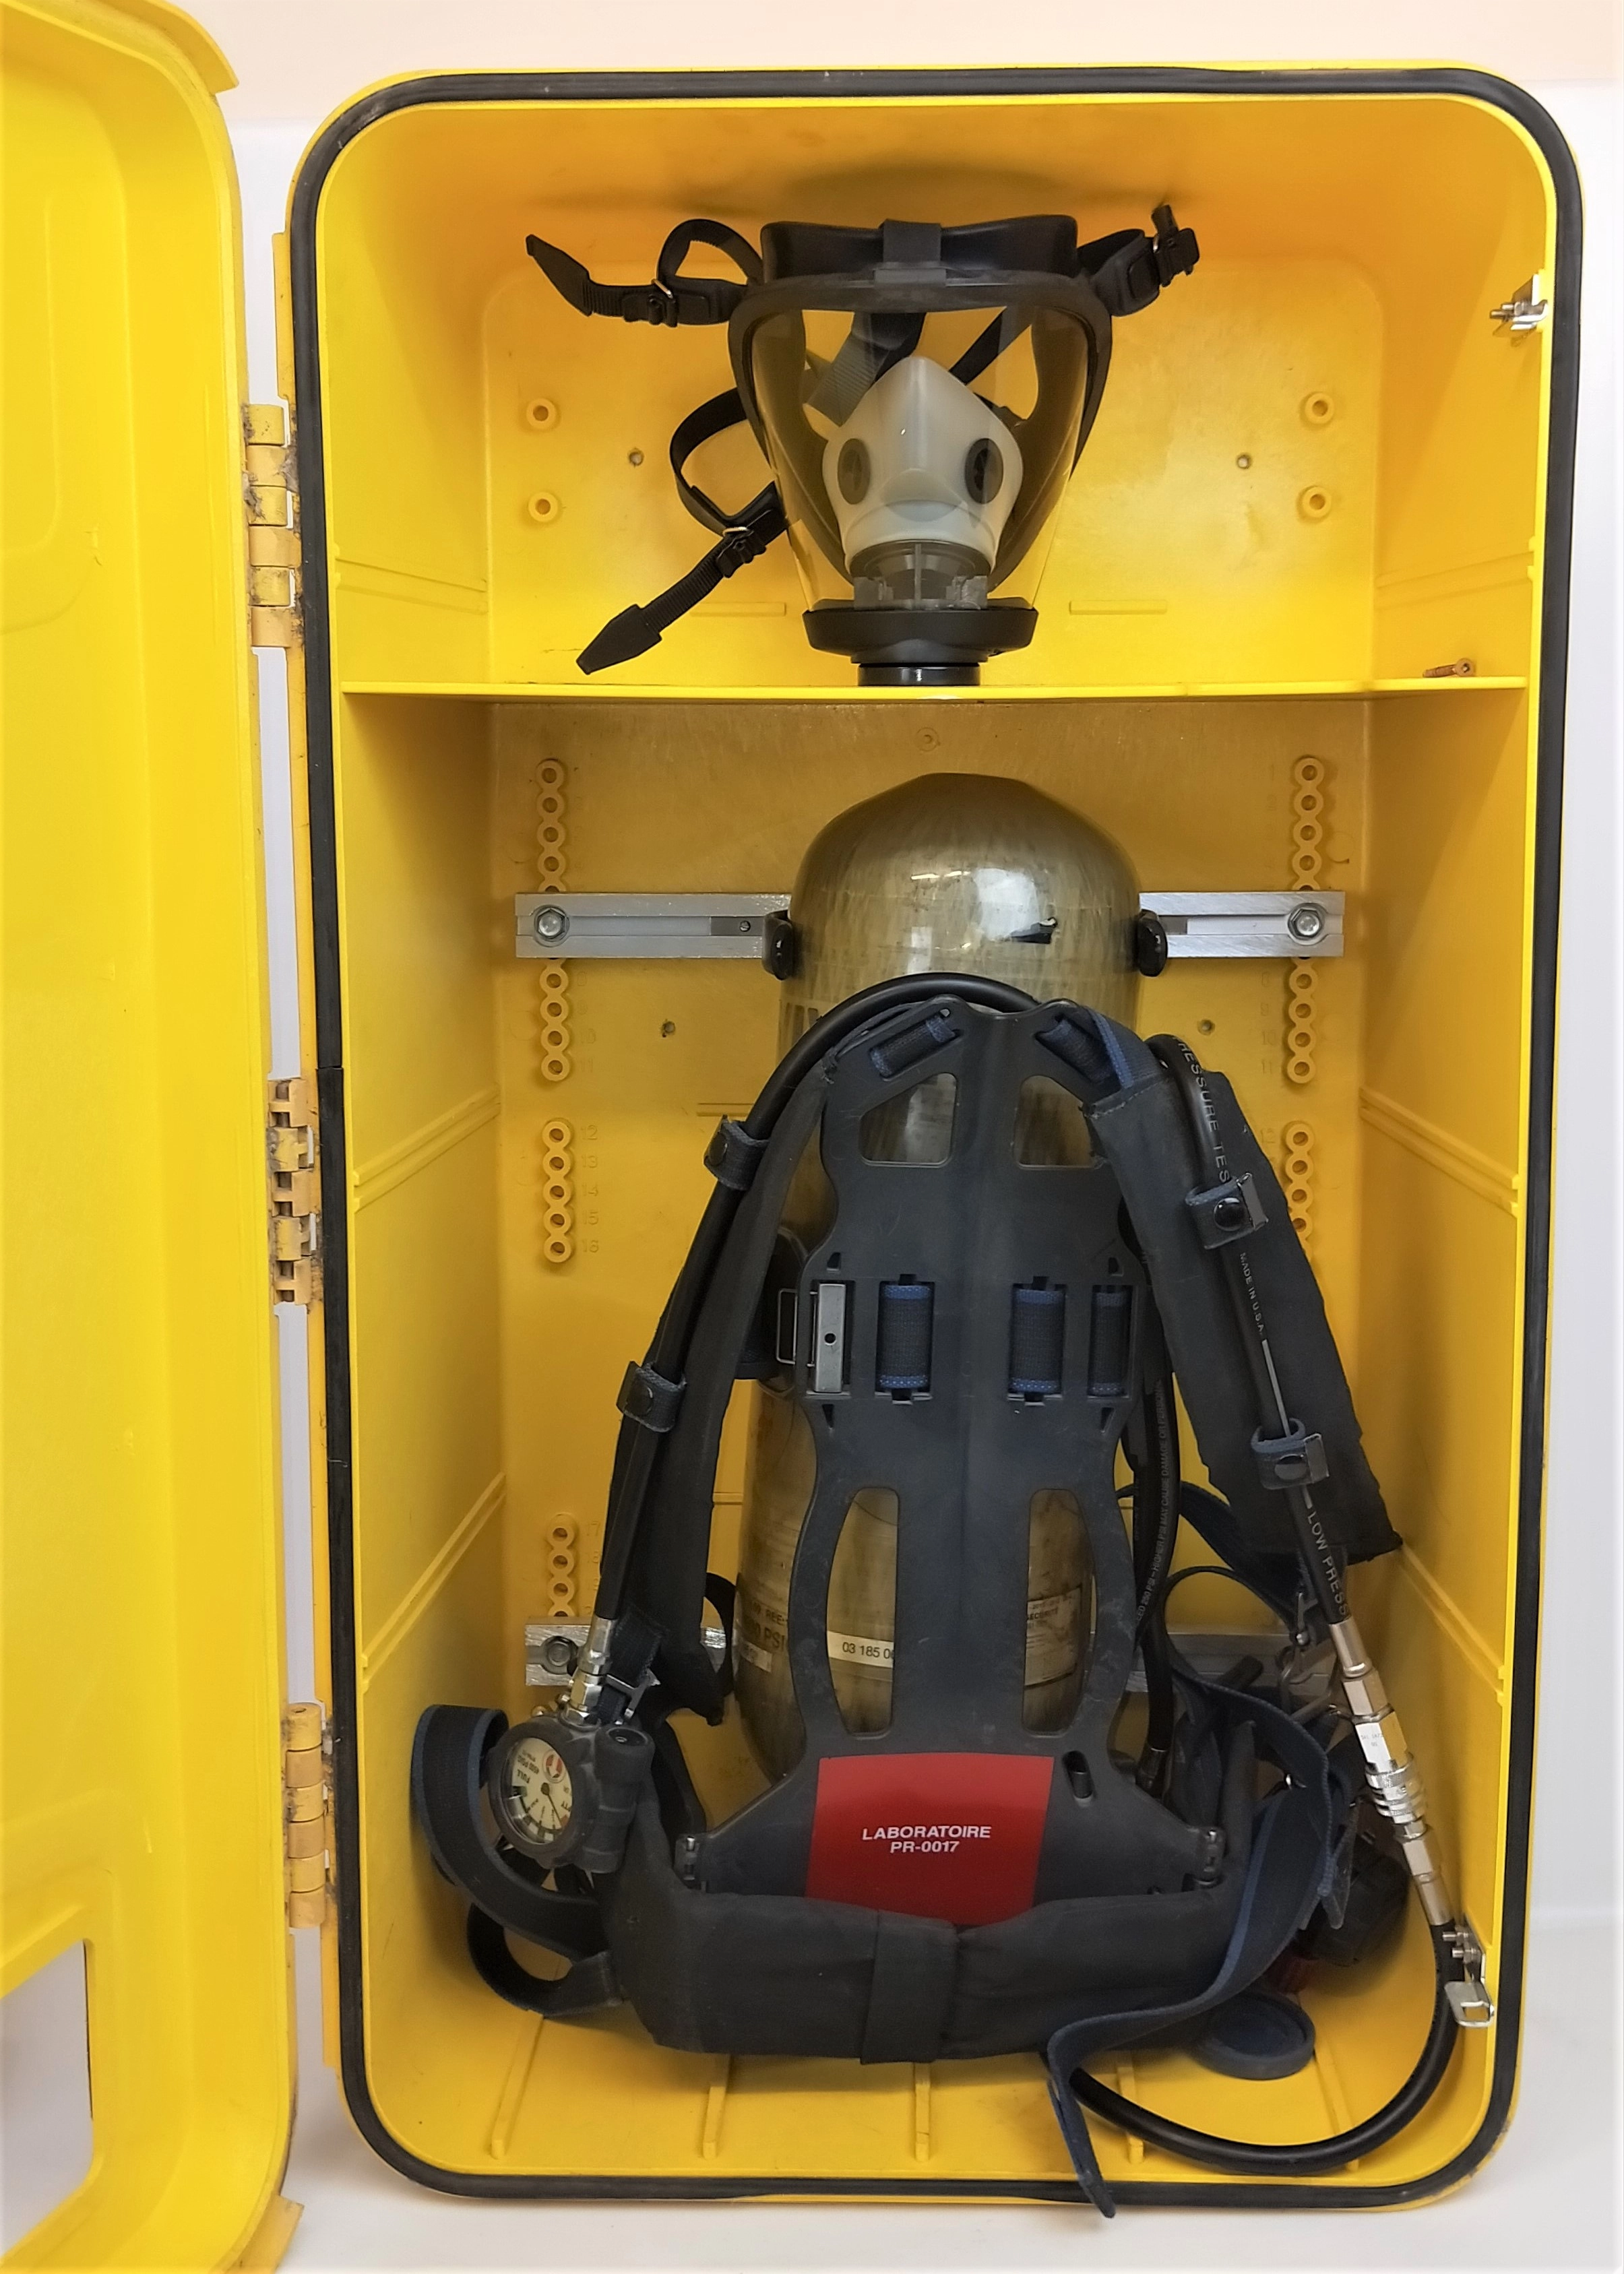 Survivair Panther 964800 NFPA Breathing Apparatus with Tank and Case